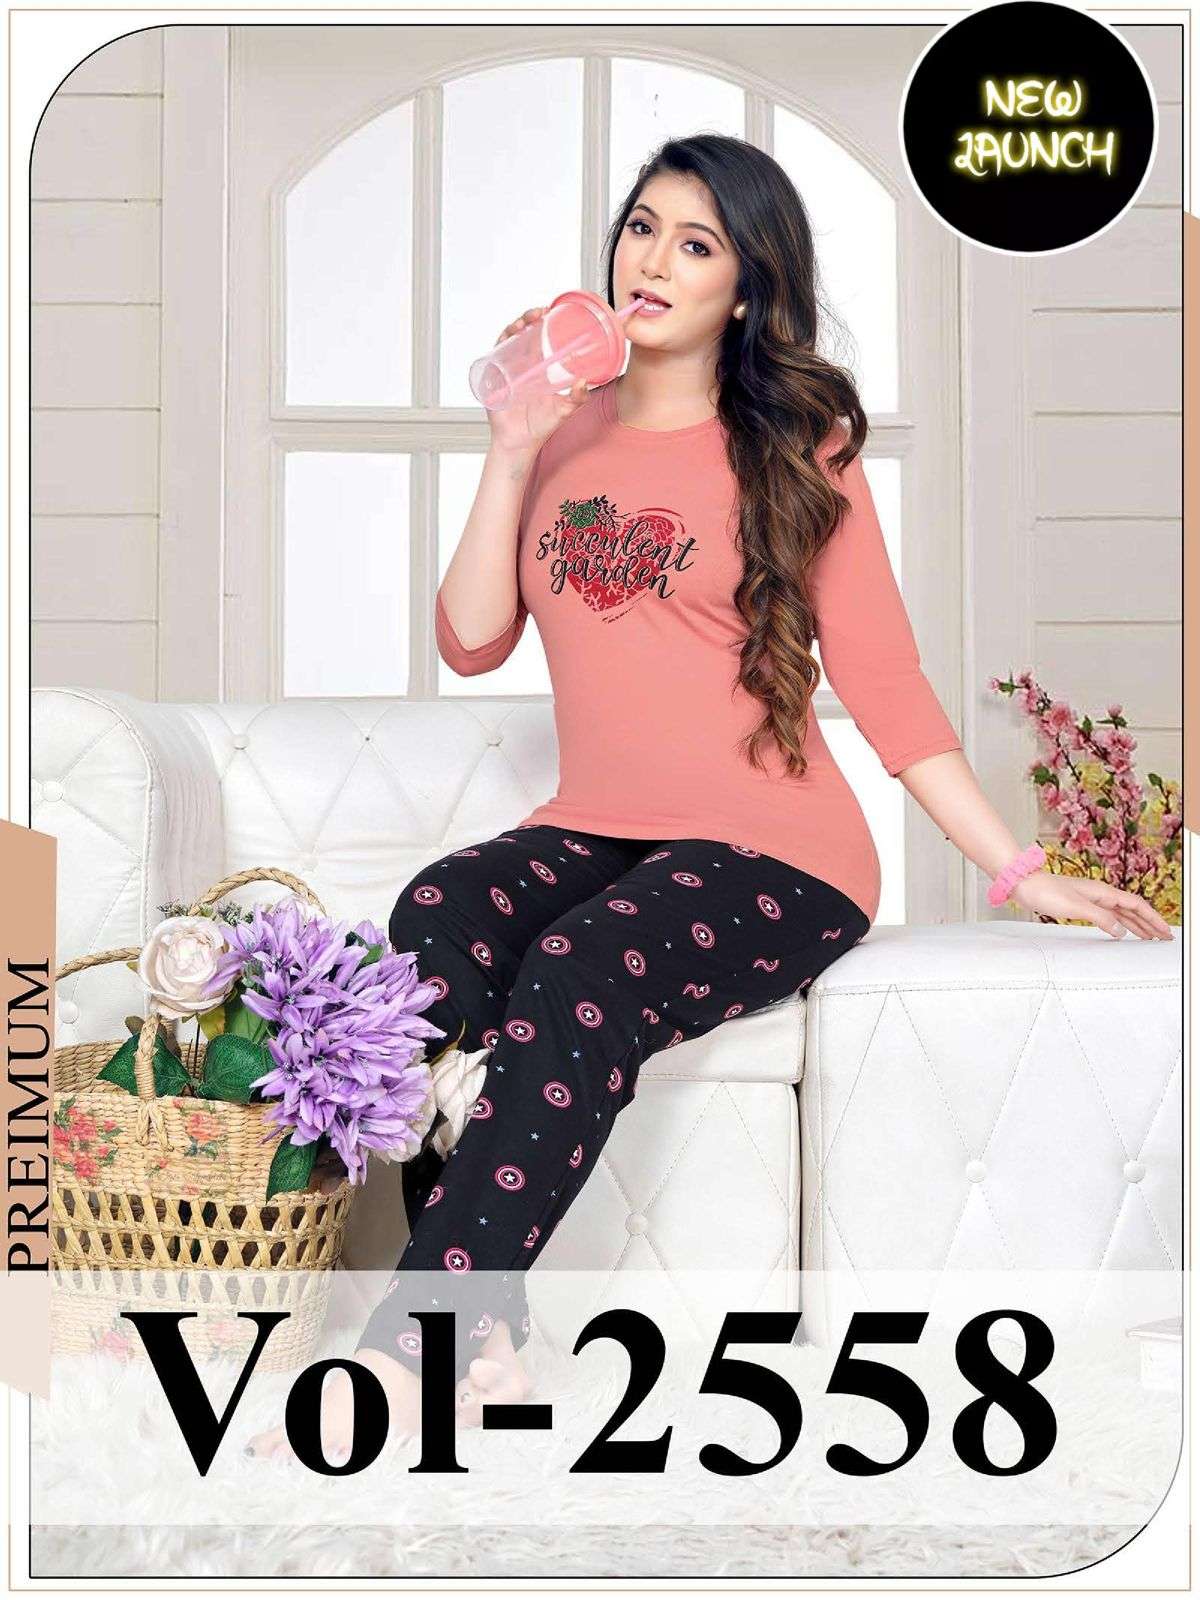 SUMMER SPECIAL VOL.2558 Heavy Shinker Hosiery Cotton Night Suits 3/4 Full sleeve CATALOG WHOLESALER BEST RATE